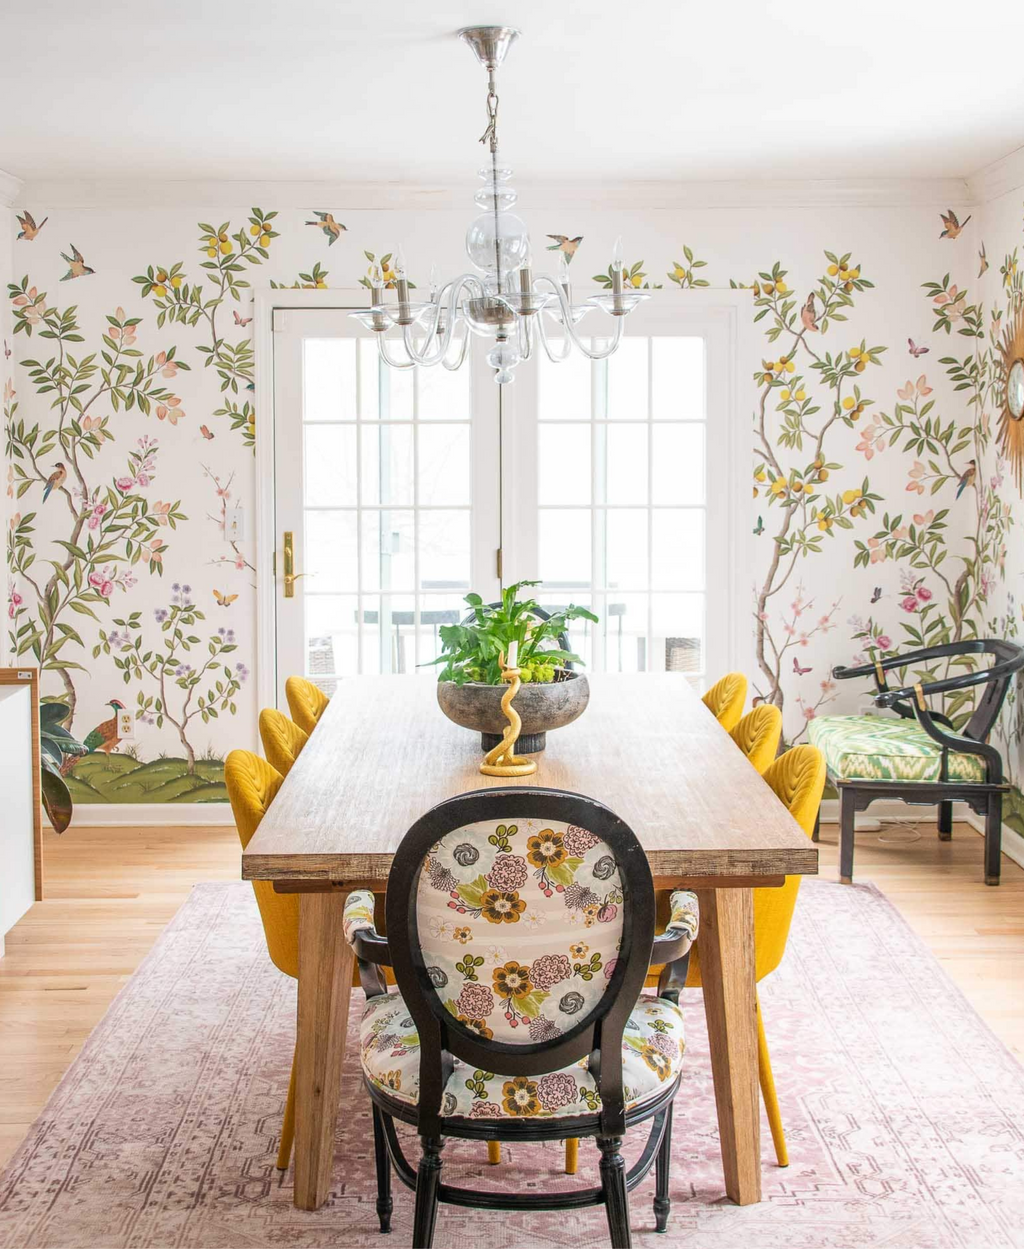 Diane Hill's 'Chinoiserie Chic' wallpaper design for Rebel Walls featured in blogger 'At Charlotte's House' home